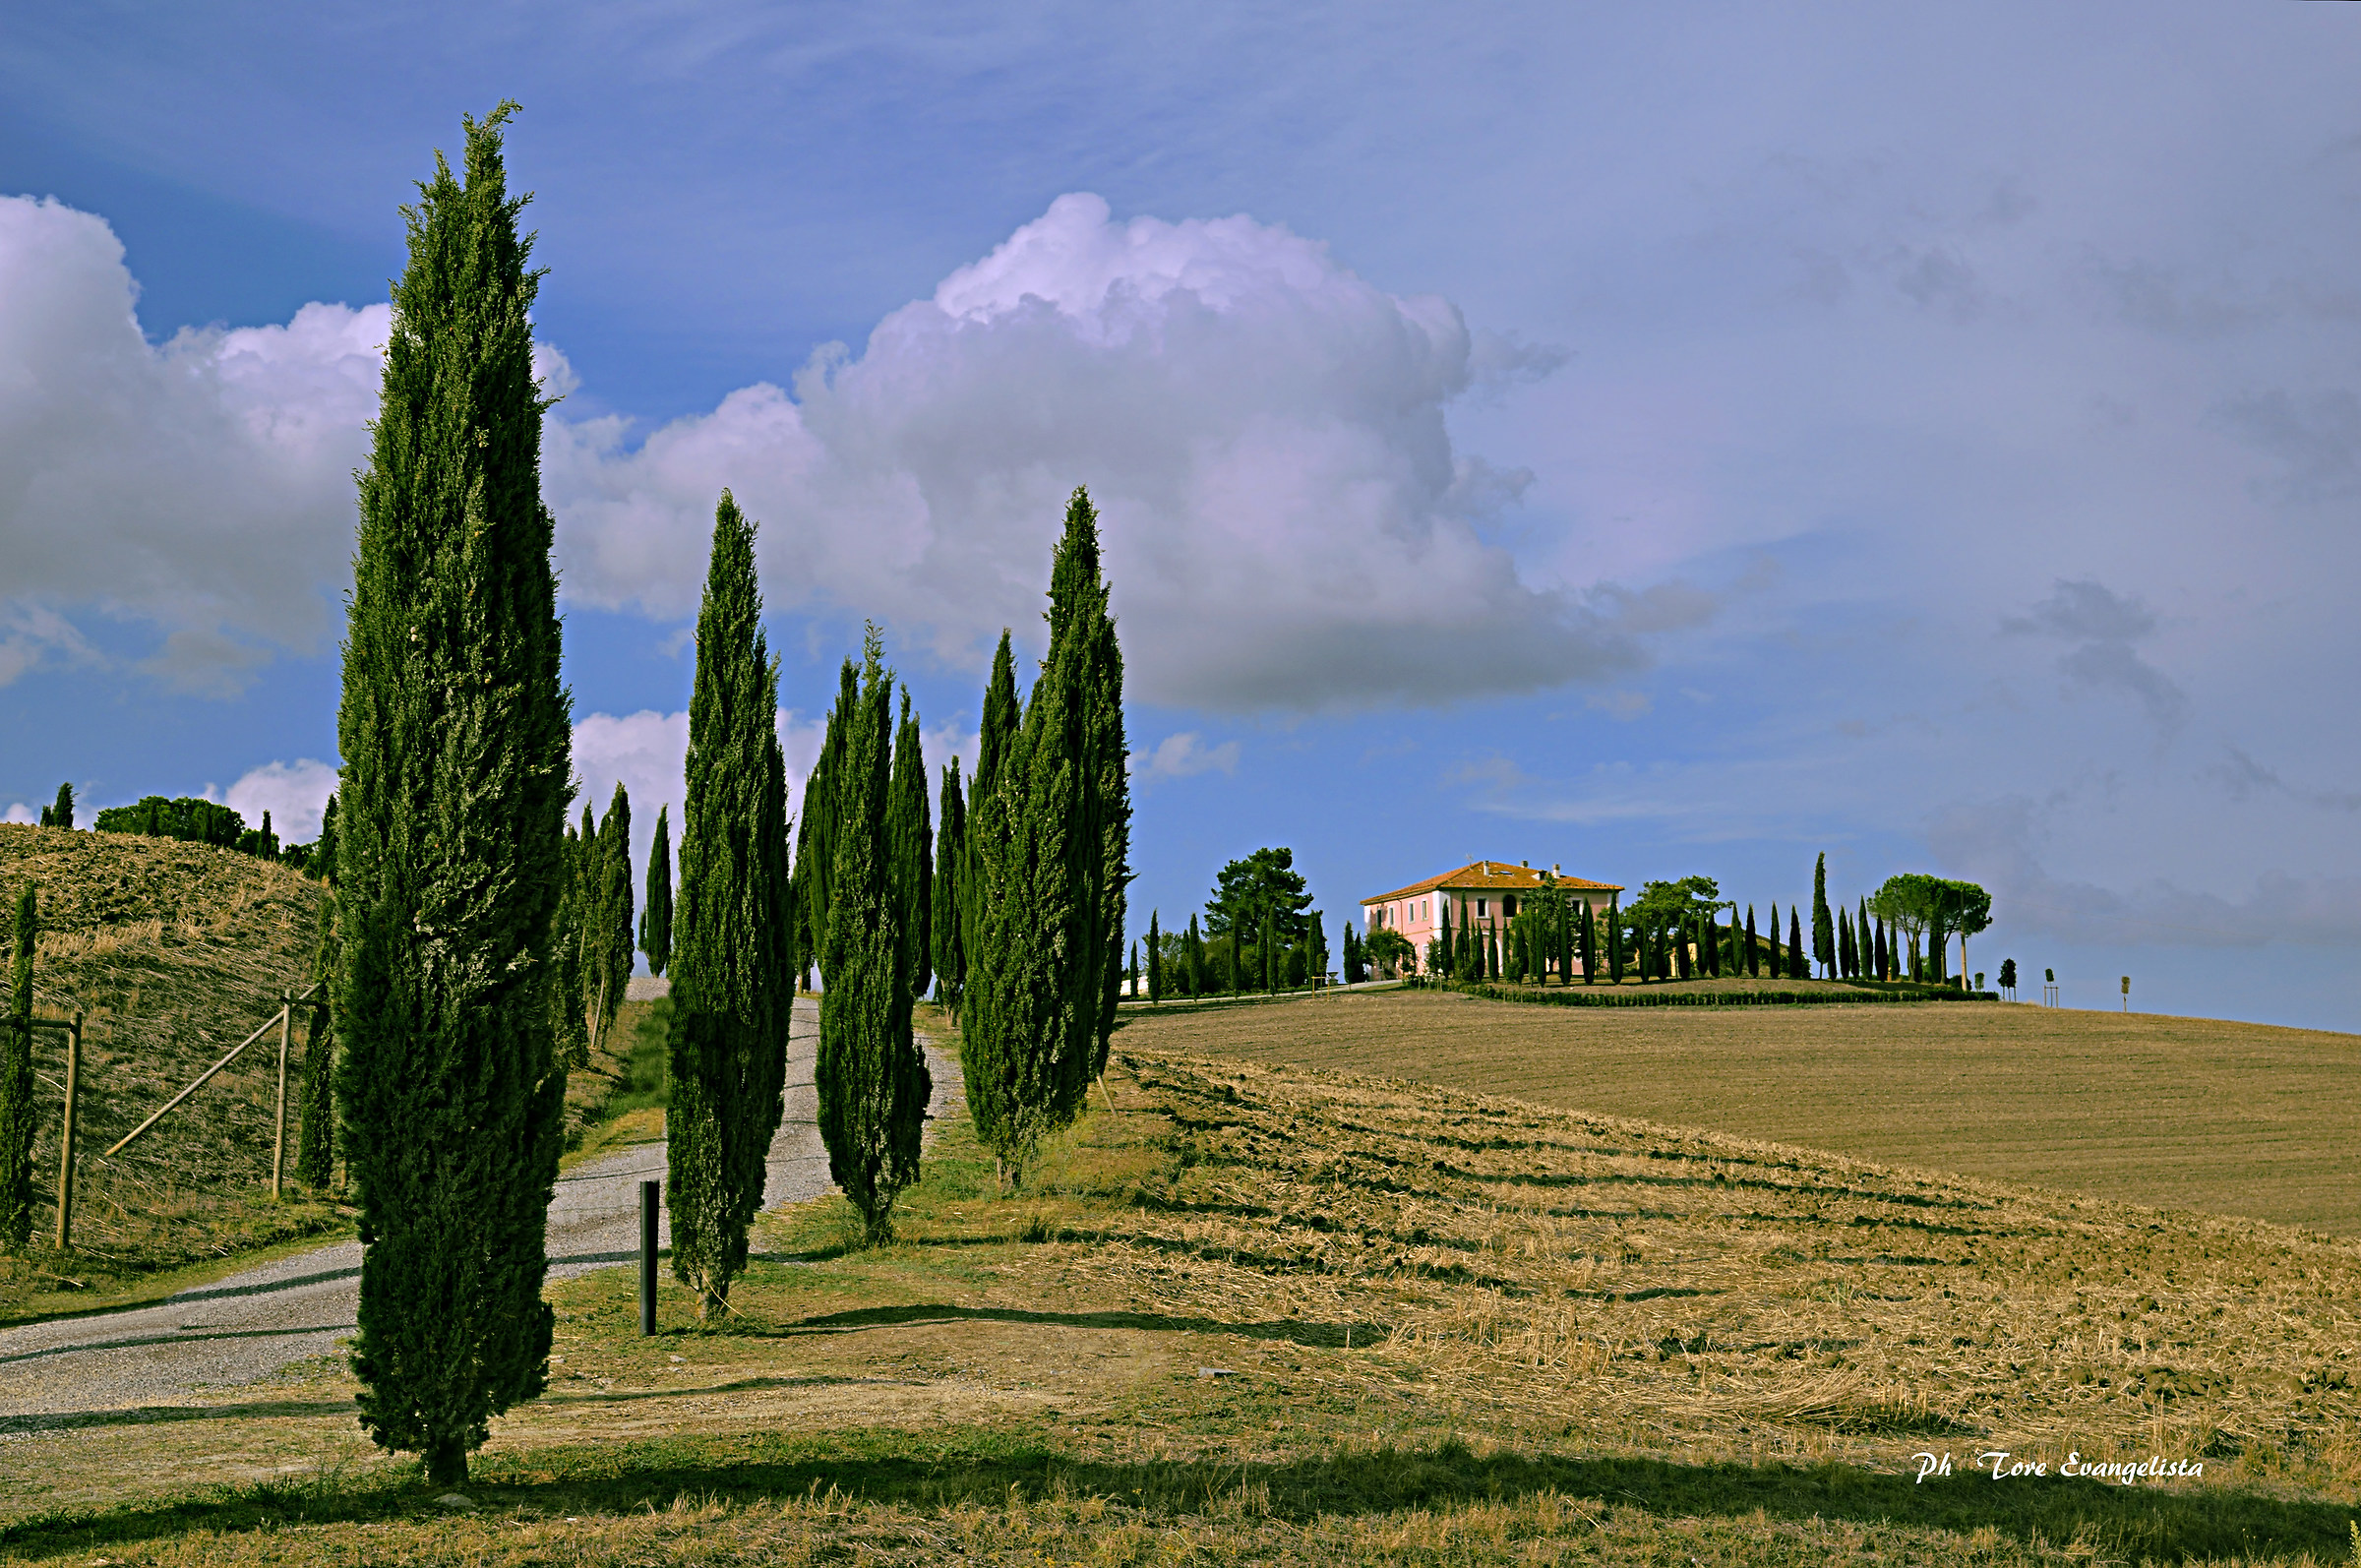 Cypresses in the foreground....